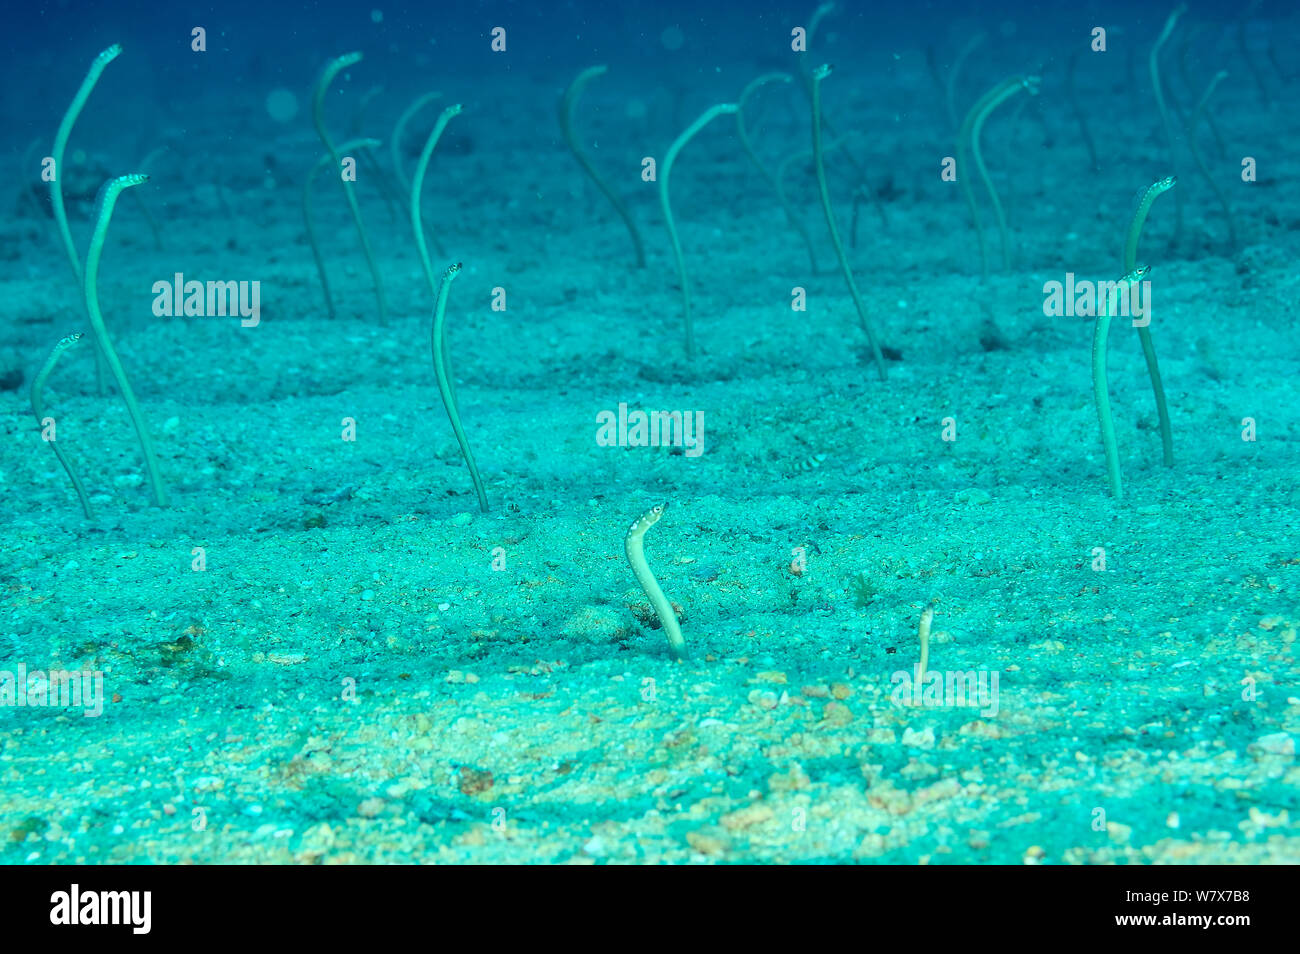 Whitespotted / Spaghetti garden eels (Gorgasia maculata) coming out of the sandy sea floor,  Madagascar. Indian Ocean. Stock Photo